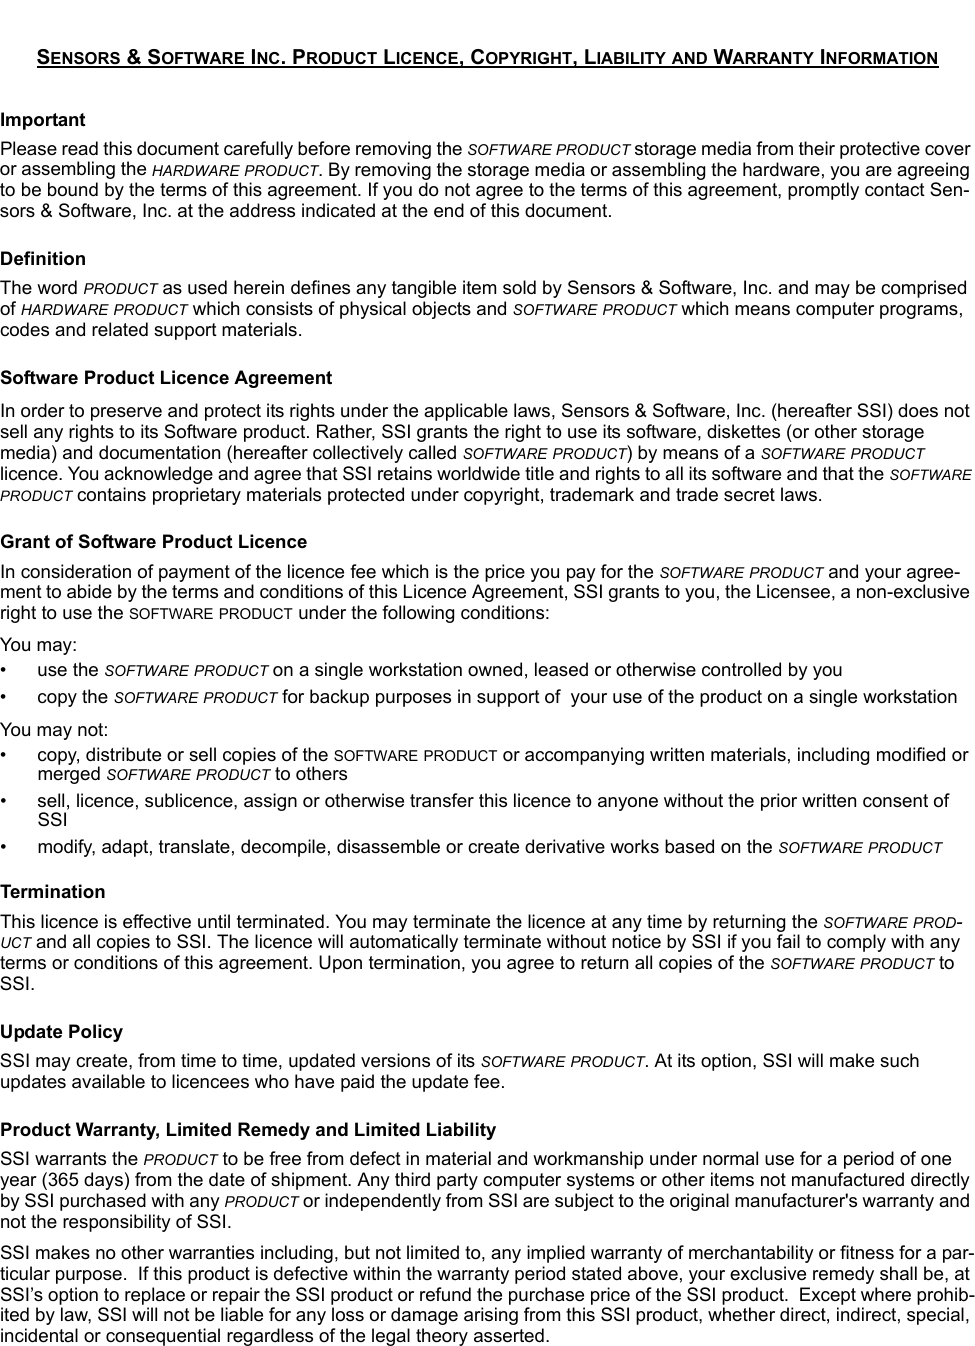 SENSORS &amp; SOFTWARE INC. PRODUCT LICENCE, COPYRIGHT, LIABILITY AND WARRANTY INFORMATIONImportantPlease read this document carefully before removing the SOFTWARE PRODUCT storage media from their protective cover or assembling the HARDWARE PRODUCT. By removing the storage media or assembling the hardware, you are agreeing to be bound by the terms of this agreement. If you do not agree to the terms of this agreement, promptly contact Sen-sors &amp; Software, Inc. at the address indicated at the end of this document.DefinitionThe word PRODUCT as used herein defines any tangible item sold by Sensors &amp; Software, Inc. and may be comprised of HARDWARE PRODUCT which consists of physical objects and SOFTWARE PRODUCT which means computer programs, codes and related support materials.Software Product Licence AgreementIn order to preserve and protect its rights under the applicable laws, Sensors &amp; Software, Inc. (hereafter SSI) does not sell any rights to its Software product. Rather, SSI grants the right to use its software, diskettes (or other storage media) and documentation (hereafter collectively called SOFTWARE PRODUCT) by means of a SOFTWARE PRODUCT licence. You acknowledge and agree that SSI retains worldwide title and rights to all its software and that the SOFTWARE PRODUCT contains proprietary materials protected under copyright, trademark and trade secret laws.Grant of Software Product LicenceIn consideration of payment of the licence fee which is the price you pay for the SOFTWARE PRODUCT and your agree-ment to abide by the terms and conditions of this Licence Agreement, SSI grants to you, the Licensee, a non-exclusive right to use the SOFTWARE PRODUCT under the following conditions:You  may:• use the SOFTWARE PRODUCT on a single workstation owned, leased or otherwise controlled by you• copy the SOFTWARE PRODUCT for backup purposes in support of  your use of the product on a single workstationYou may not:• copy, distribute or sell copies of the SOFTWARE PRODUCT or accompanying written materials, including modified or merged SOFTWARE PRODUCT to others• sell, licence, sublicence, assign or otherwise transfer this licence to anyone without the prior written consent of SSI• modify, adapt, translate, decompile, disassemble or create derivative works based on the SOFTWARE PRODUCTTerminationThis licence is effective until terminated. You may terminate the licence at any time by returning the SOFTWARE PROD-UCT and all copies to SSI. The licence will automatically terminate without notice by SSI if you fail to comply with any terms or conditions of this agreement. Upon termination, you agree to return all copies of the SOFTWARE PRODUCT to SSI.Update PolicySSI may create, from time to time, updated versions of its SOFTWARE PRODUCT. At its option, SSI will make such updates available to licencees who have paid the update fee.Product Warranty, Limited Remedy and Limited Liability SSI warrants the PRODUCT to be free from defect in material and workmanship under normal use for a period of one year (365 days) from the date of shipment. Any third party computer systems or other items not manufactured directly by SSI purchased with any PRODUCT or independently from SSI are subject to the original manufacturer&apos;s warranty and not the responsibility of SSI.SSI makes no other warranties including, but not limited to, any implied warranty of merchantability or fitness for a par-ticular purpose.  If this product is defective within the warranty period stated above, your exclusive remedy shall be, at SSI’s option to replace or repair the SSI product or refund the purchase price of the SSI product.  Except where prohib-ited by law, SSI will not be liable for any loss or damage arising from this SSI product, whether direct, indirect, special, incidental or consequential regardless of the legal theory asserted.